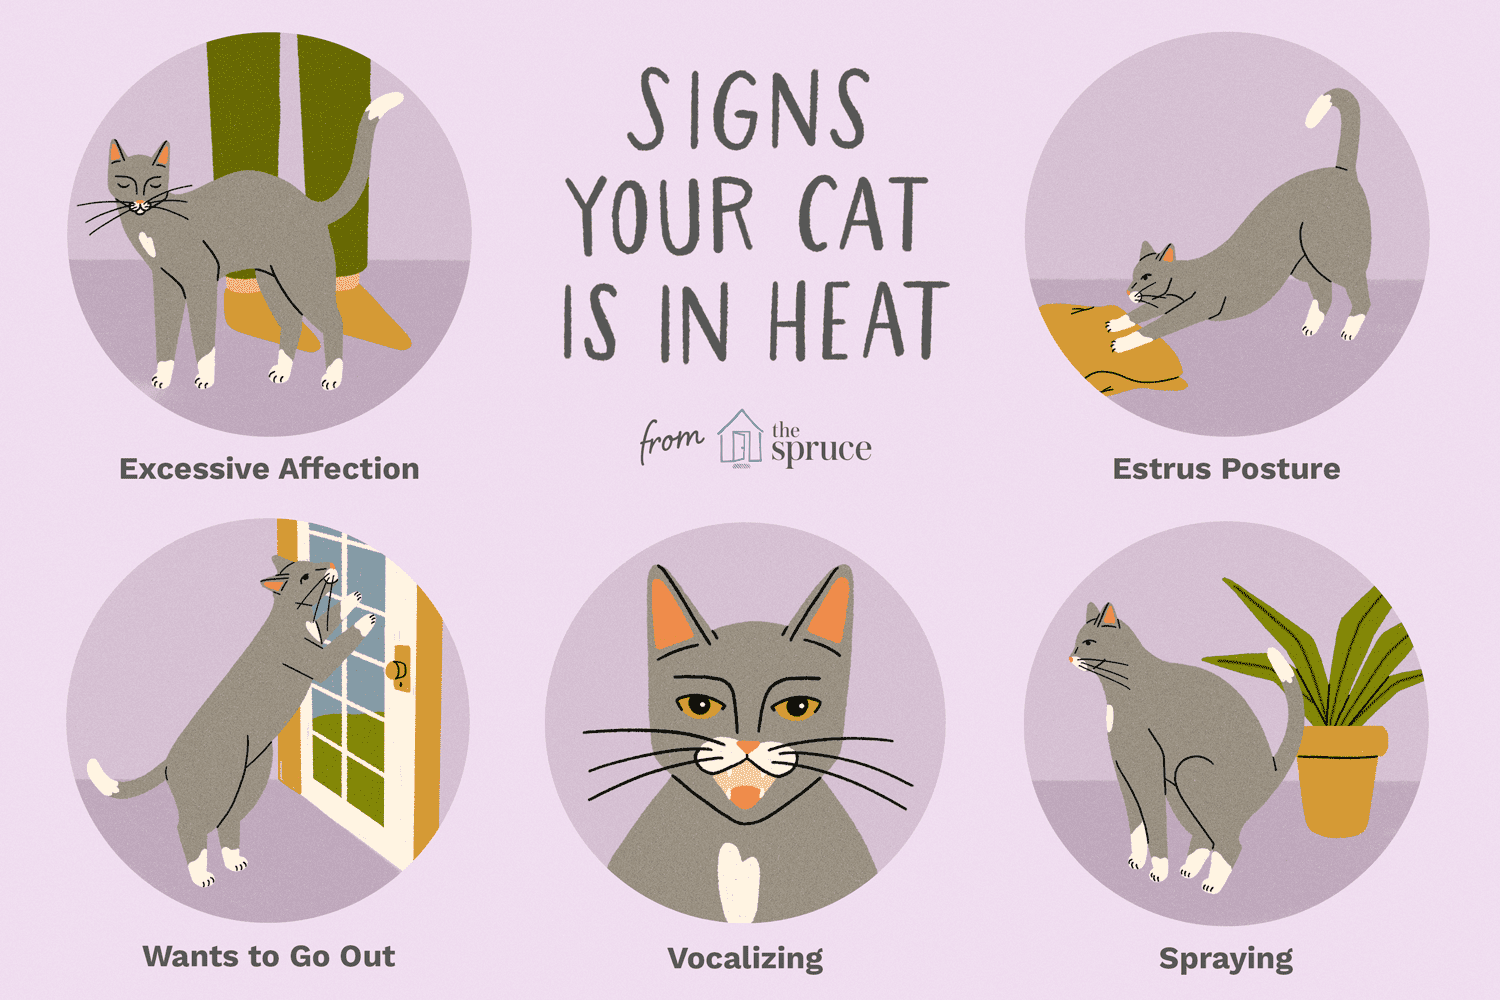 Illustrations of the signs that your cat is in heat